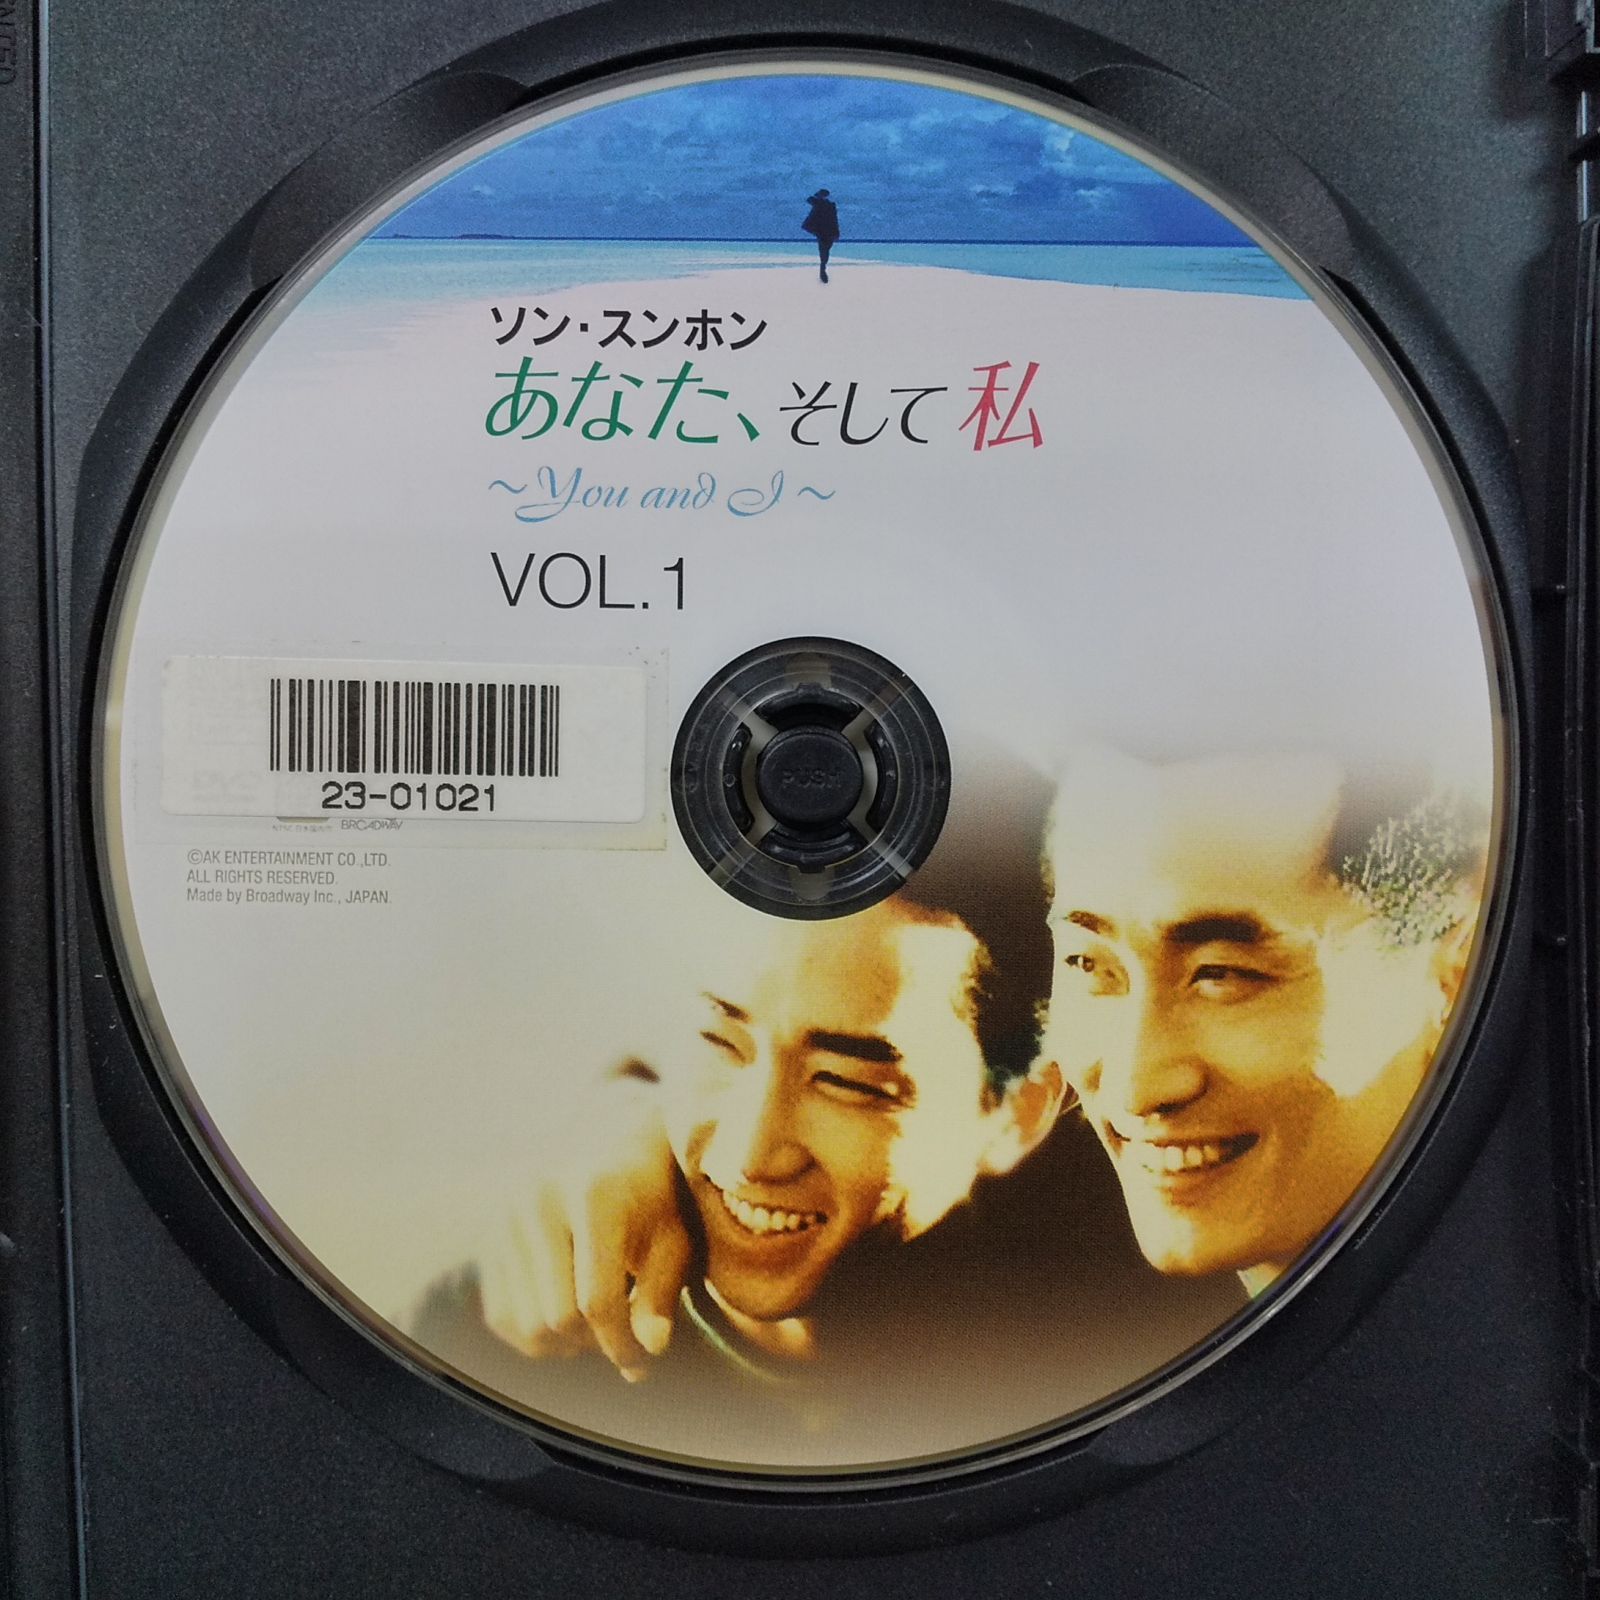 [DVD] あなた、そして私 〜You and I〜 Vol.1